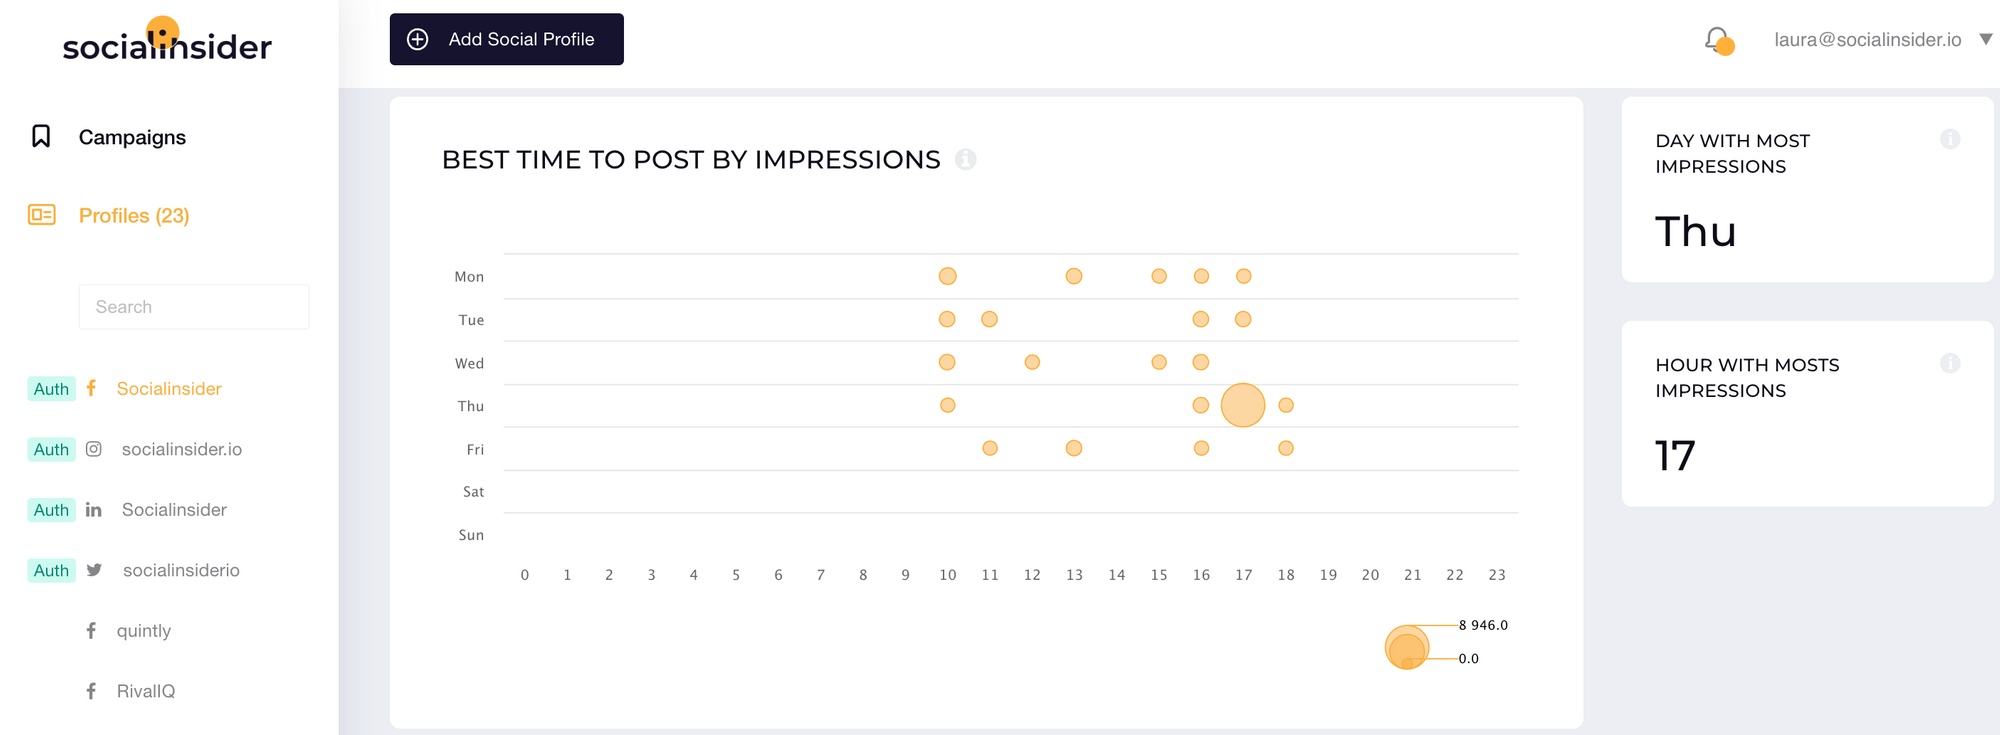 Time to post by impressions on Facebook for Socialinsider